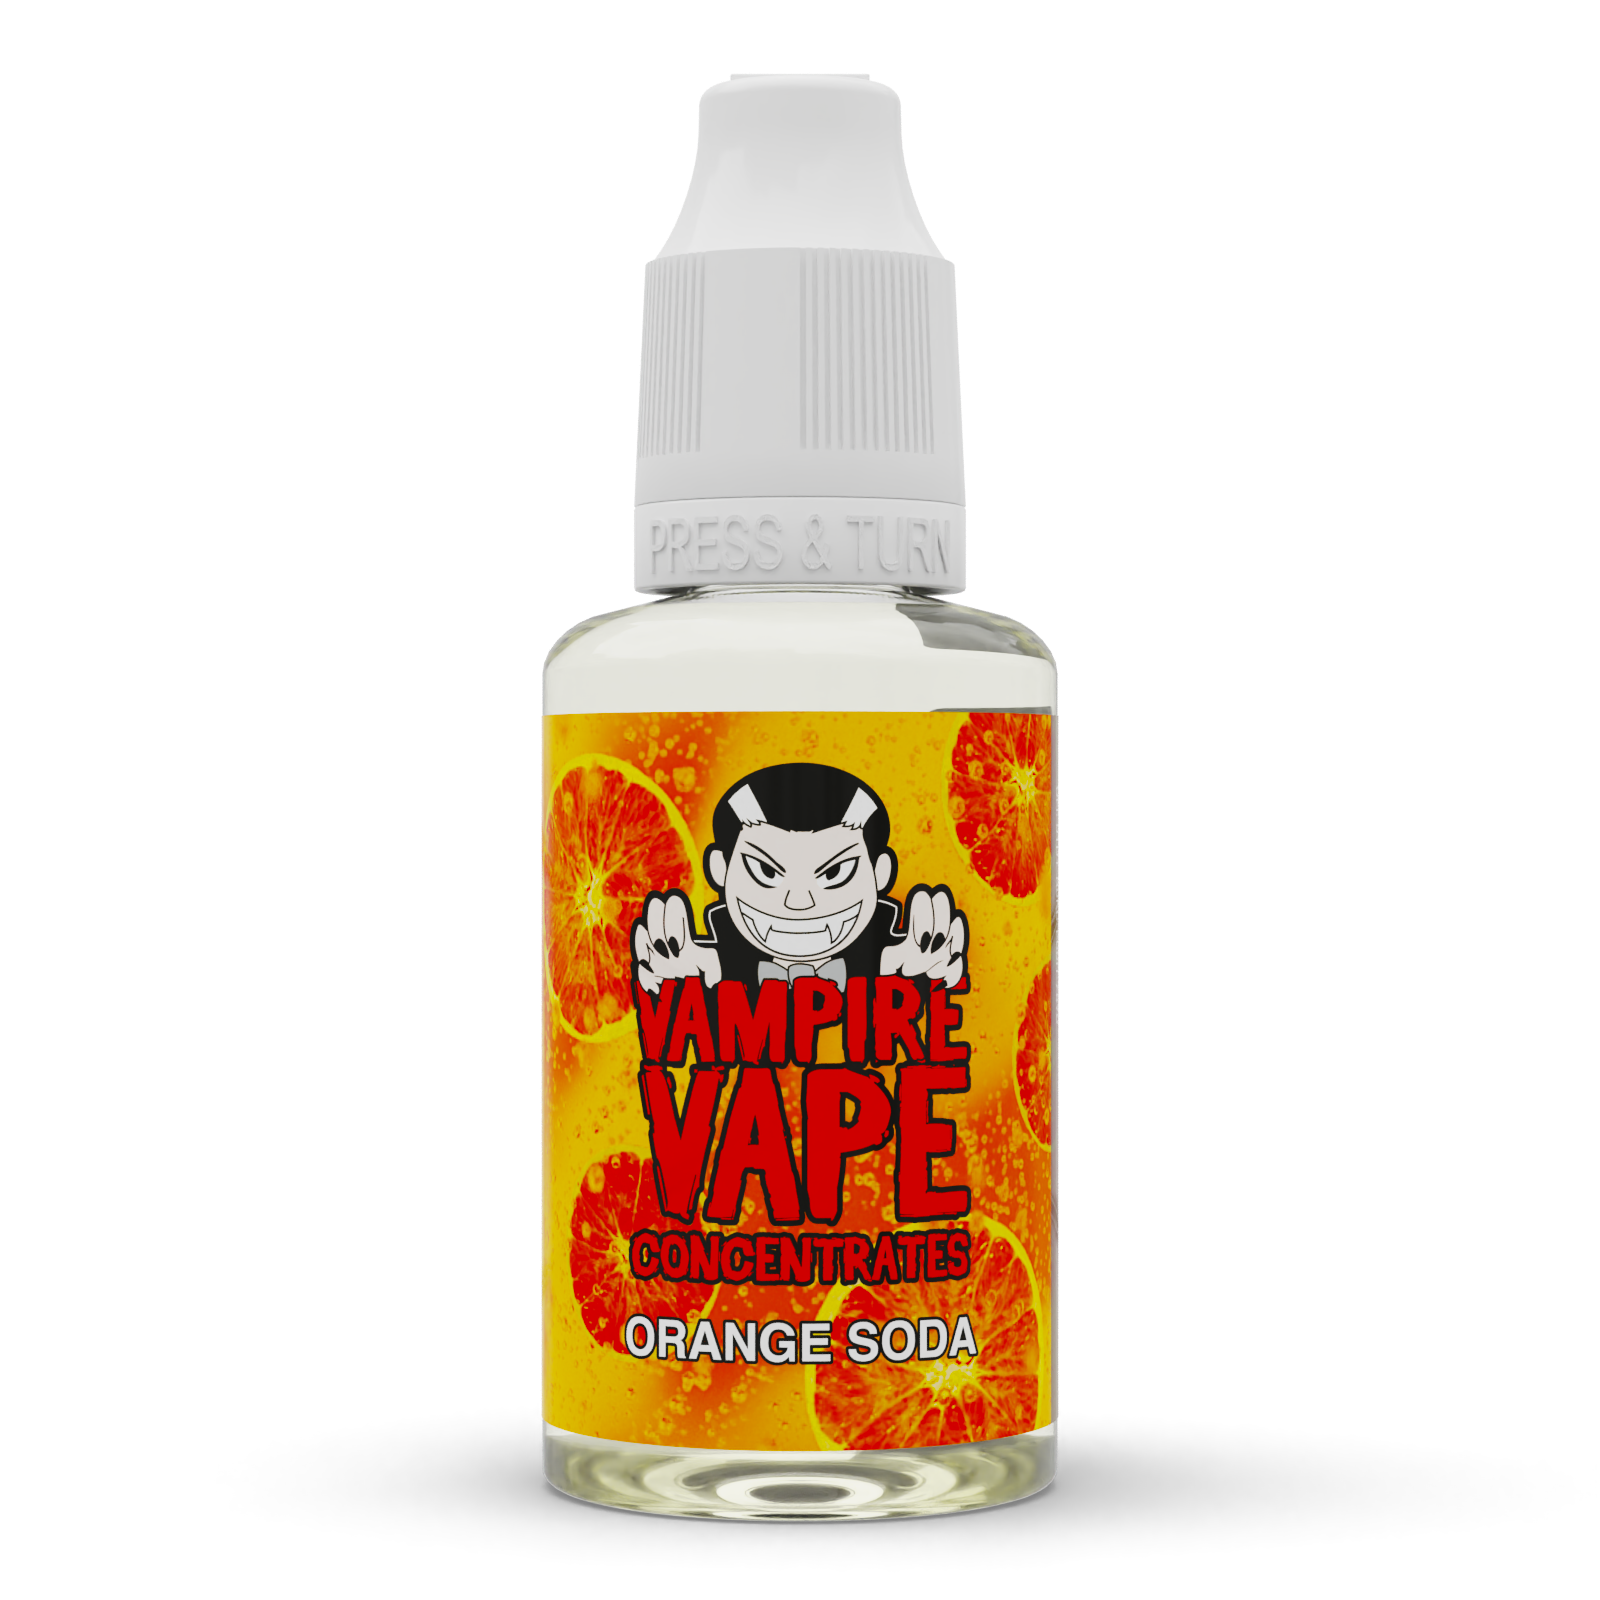 Orange Soda Flavour Concentrate by Vampire Vape